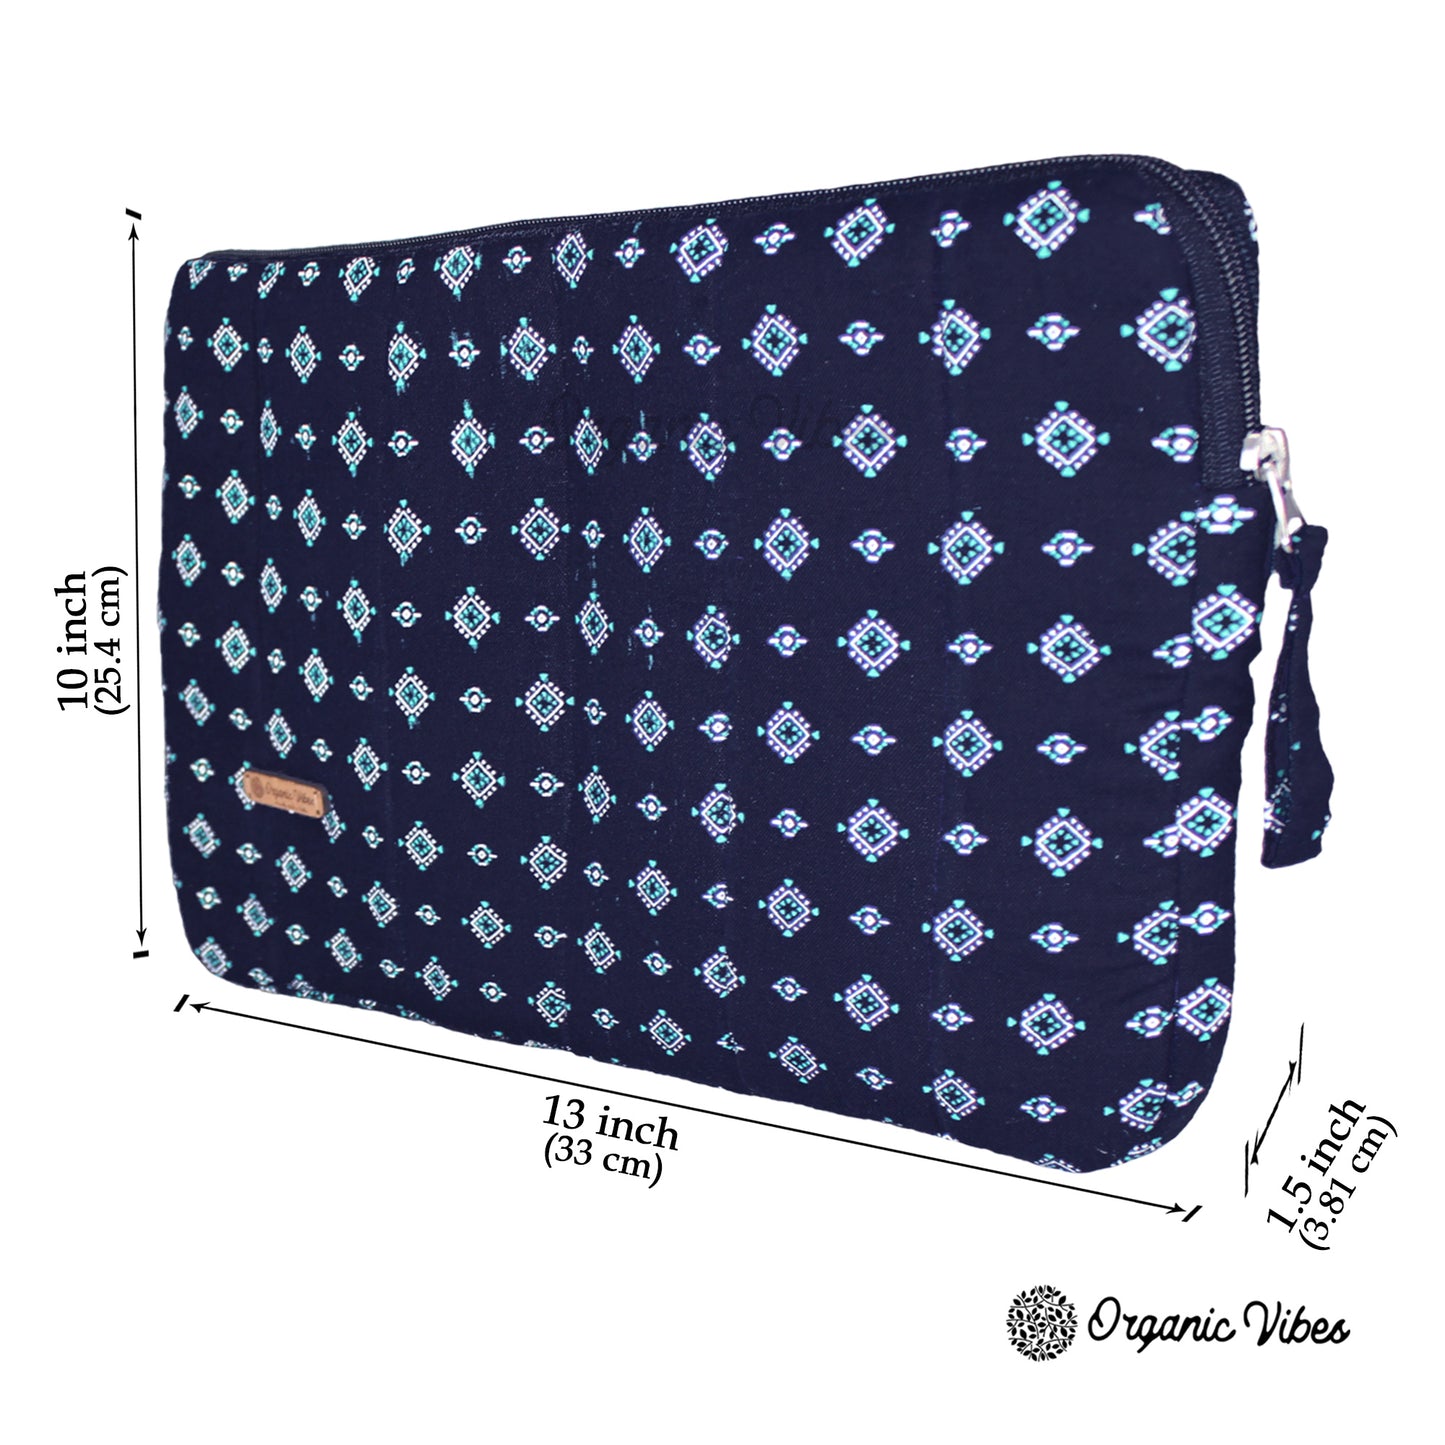 Organic Vibes Hand Block Blue Motifs Printed Laptop Sleeves for Laptop 13 Inches